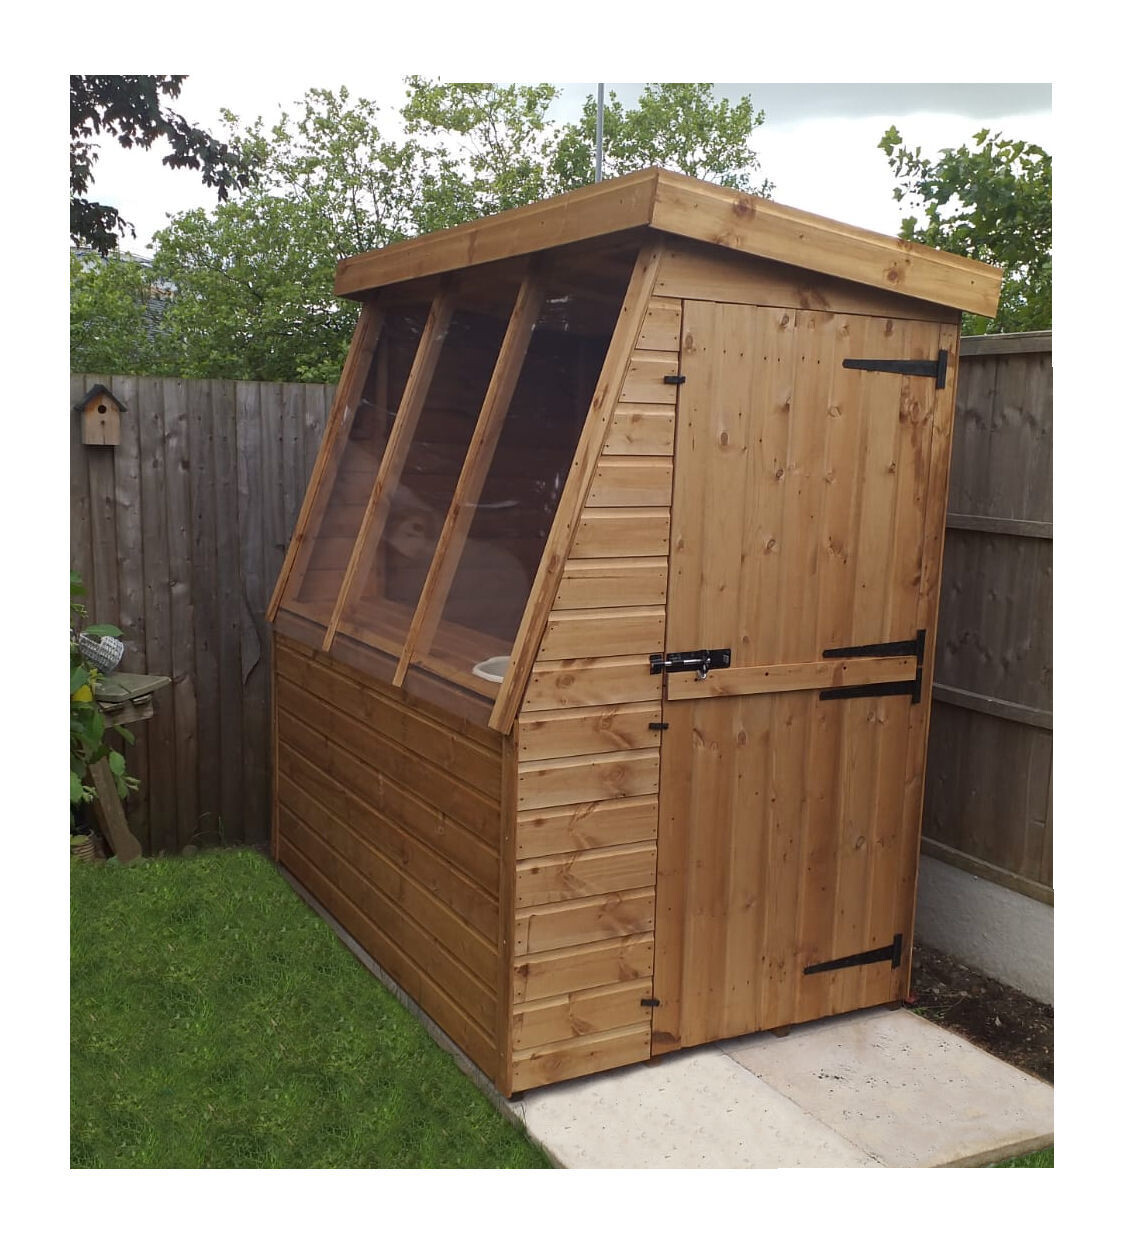 The Sturdy Potting Shed- All sizes available